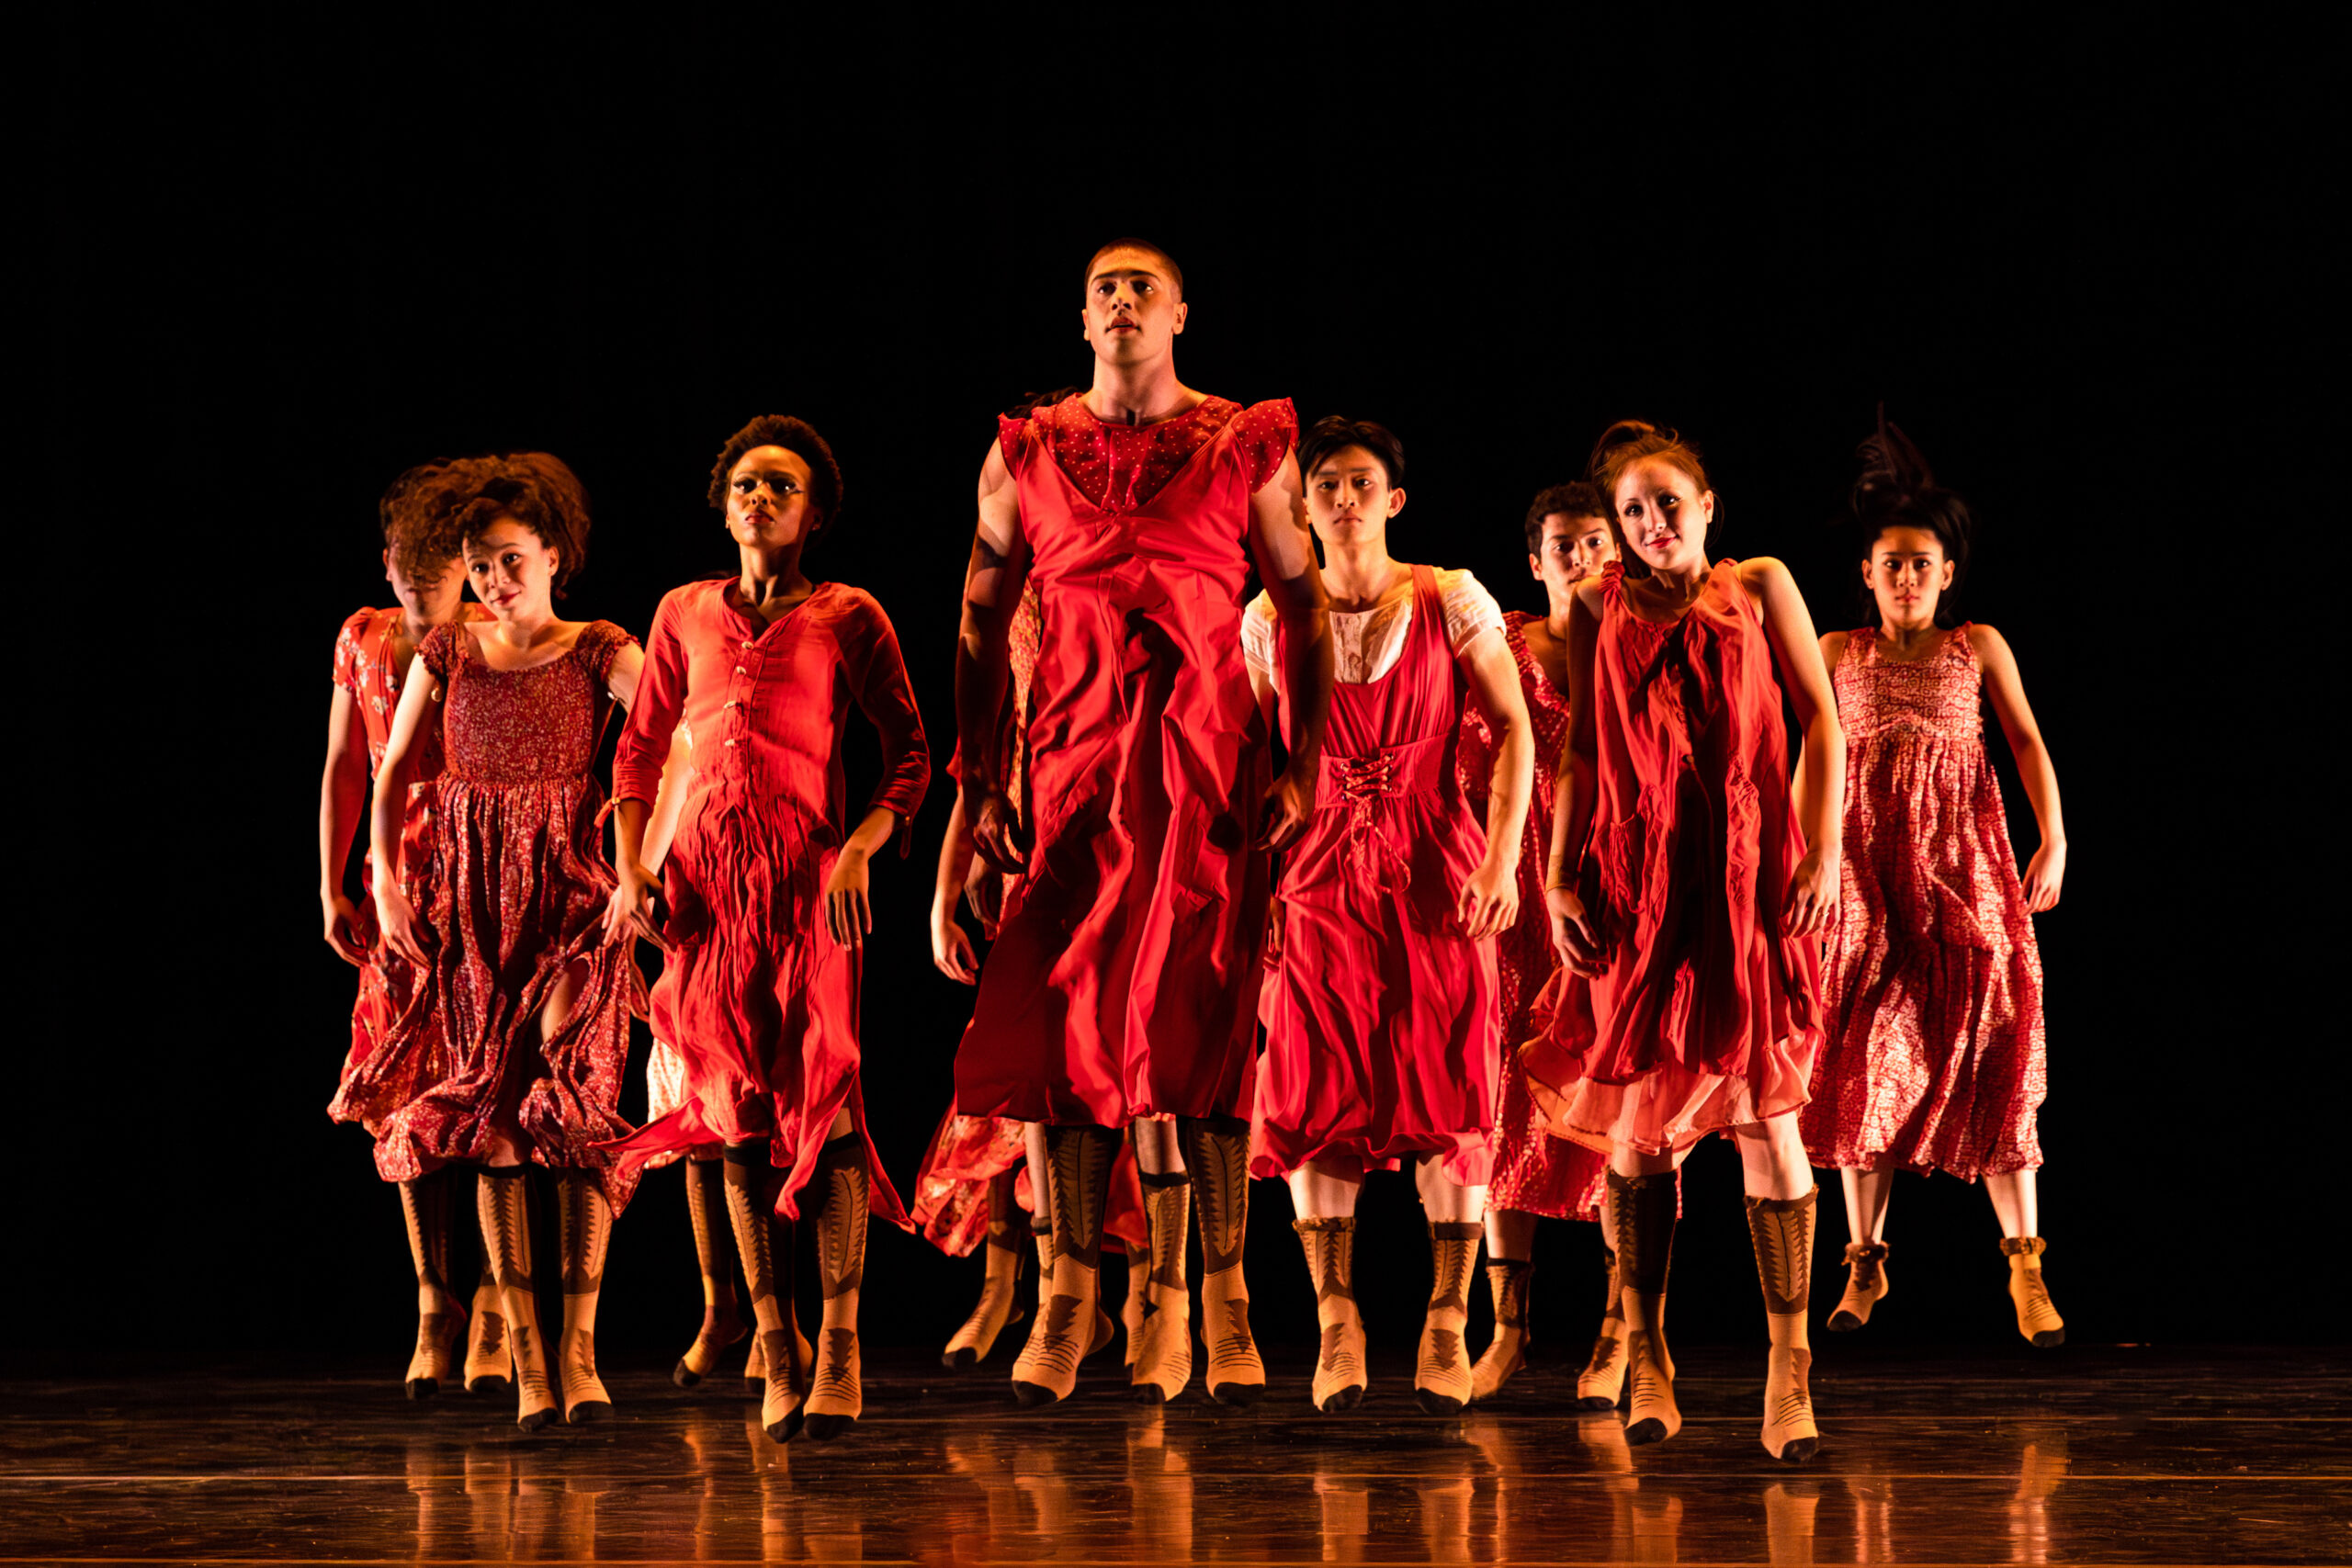 Full Company in Red costumes performing a hopping movement